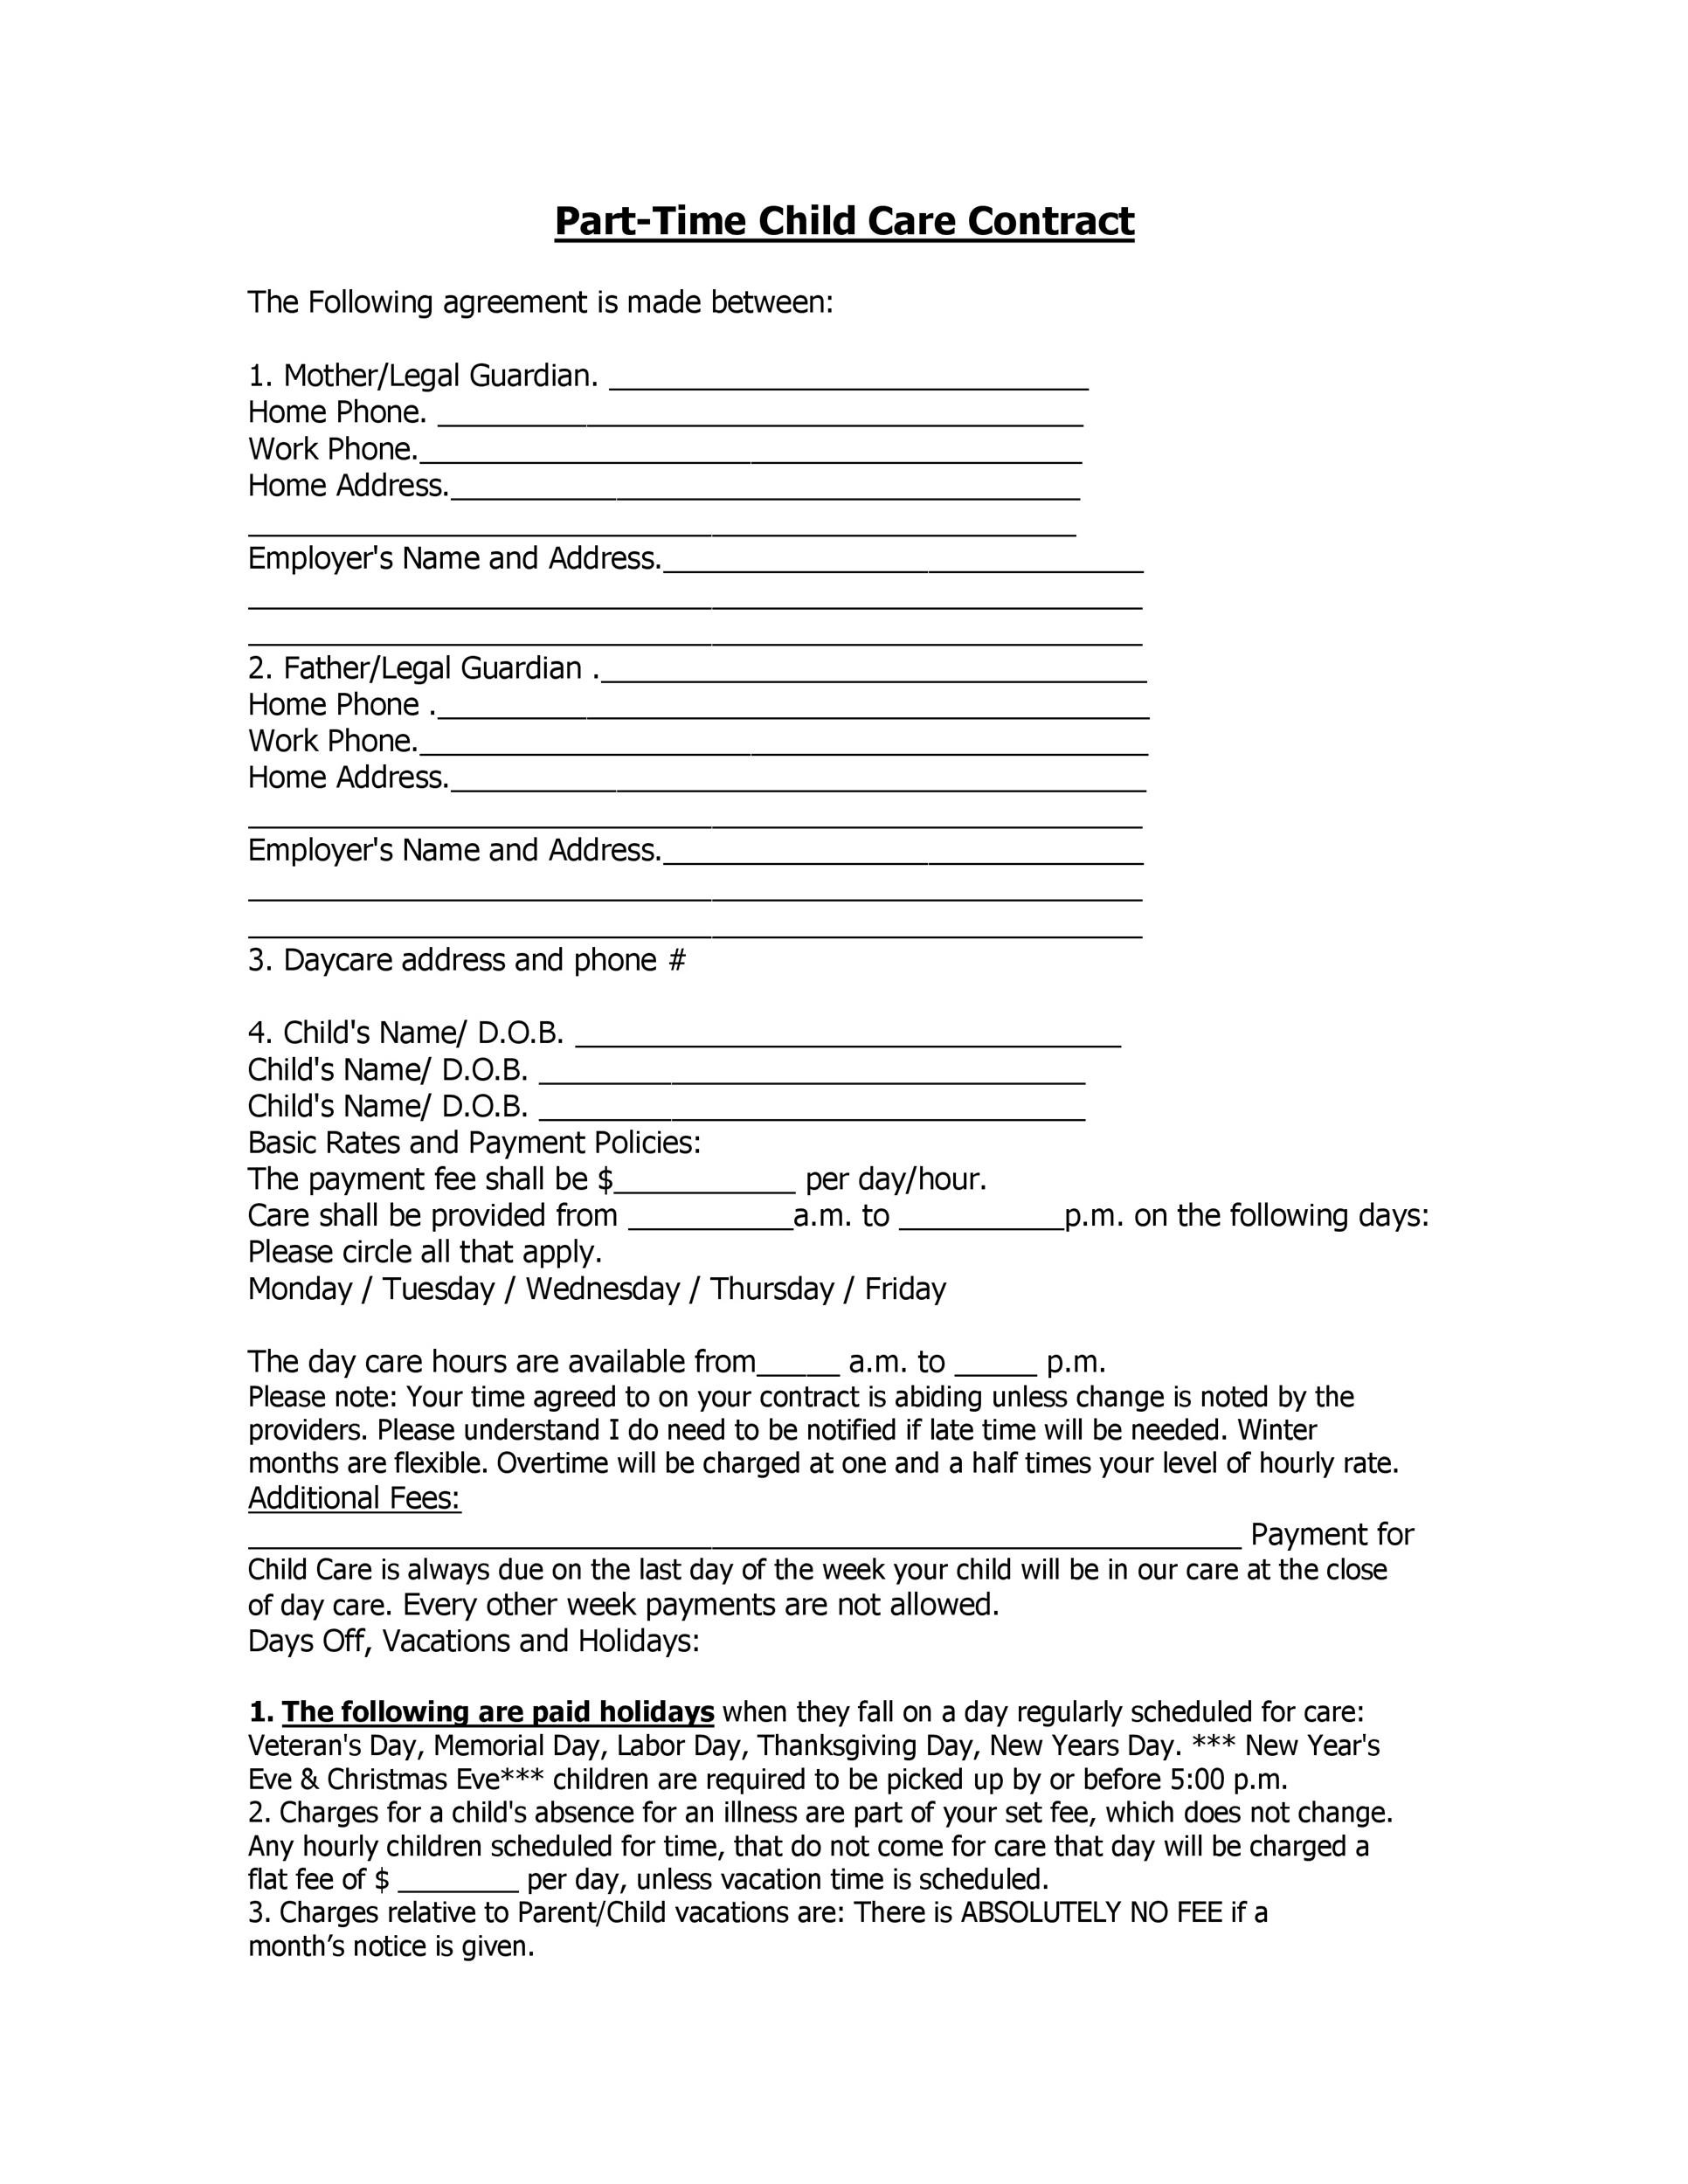 free-printable-pdf-format-form-child-care-agreement-for-babysitters-daycare-forms-childcare